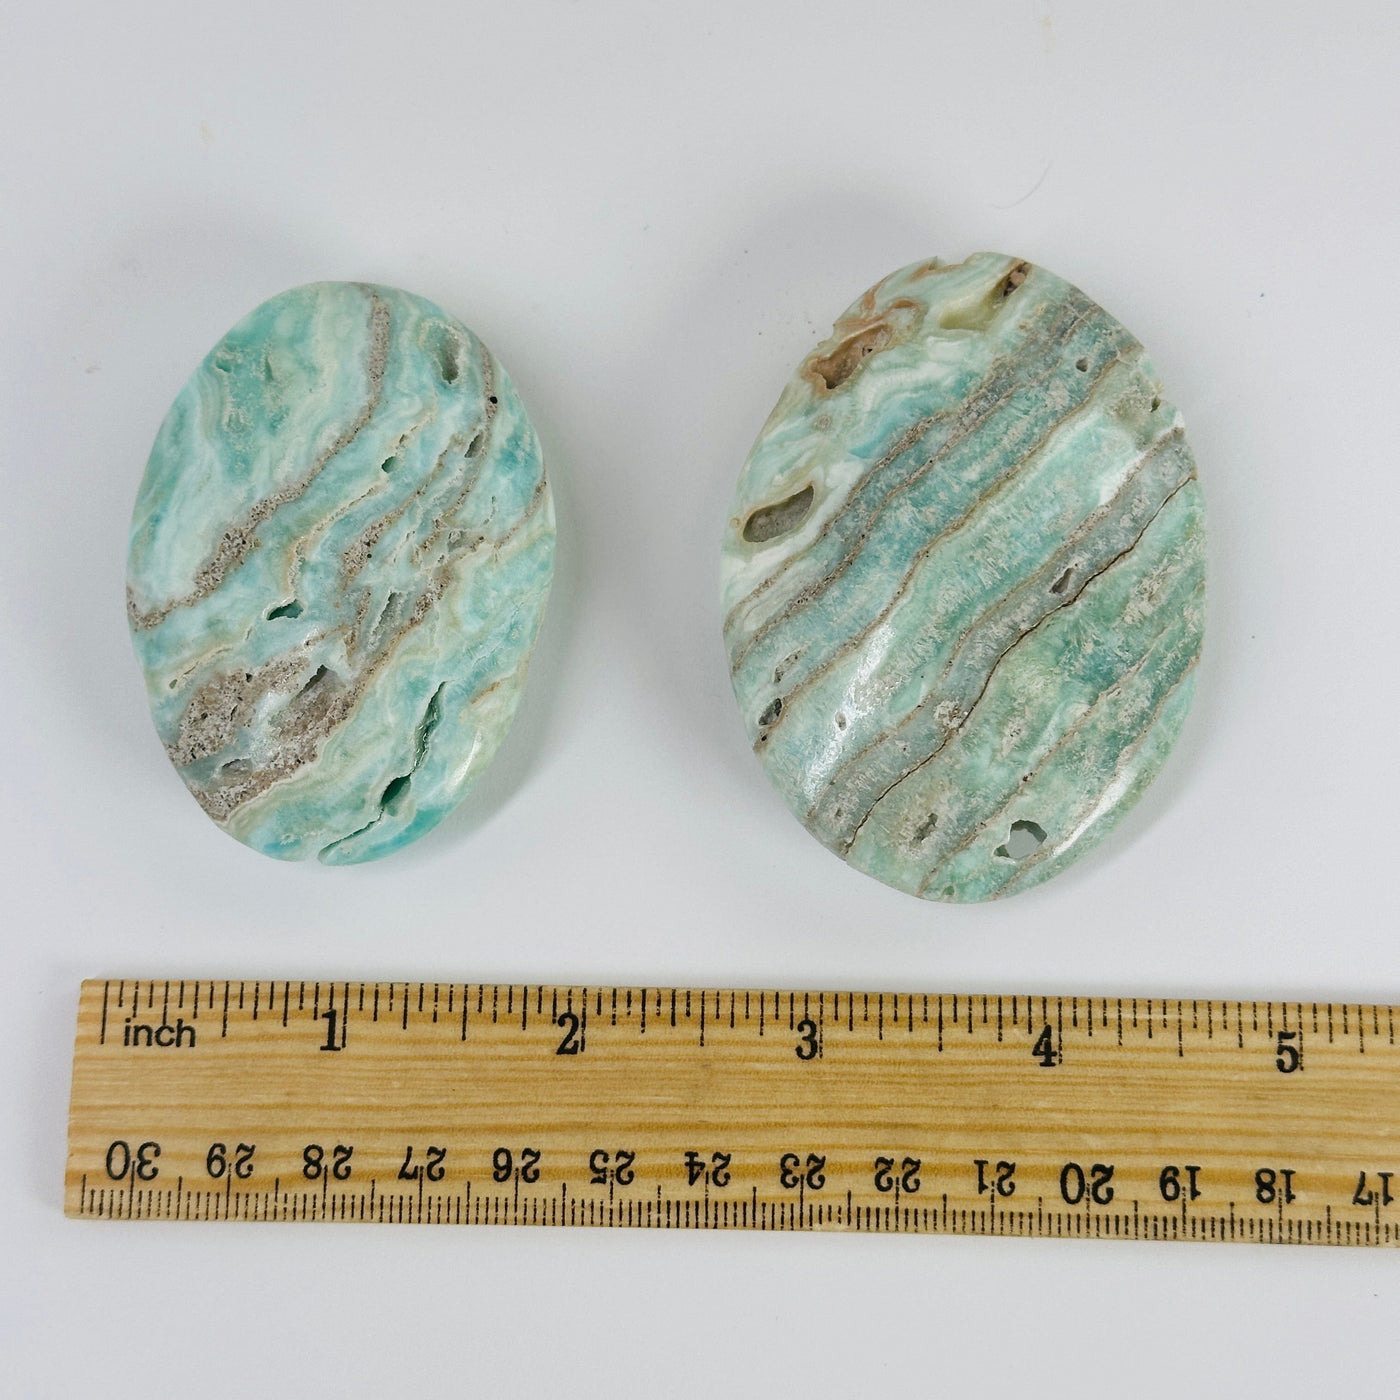 blue aragonite palm stones next to a ruler for size reference